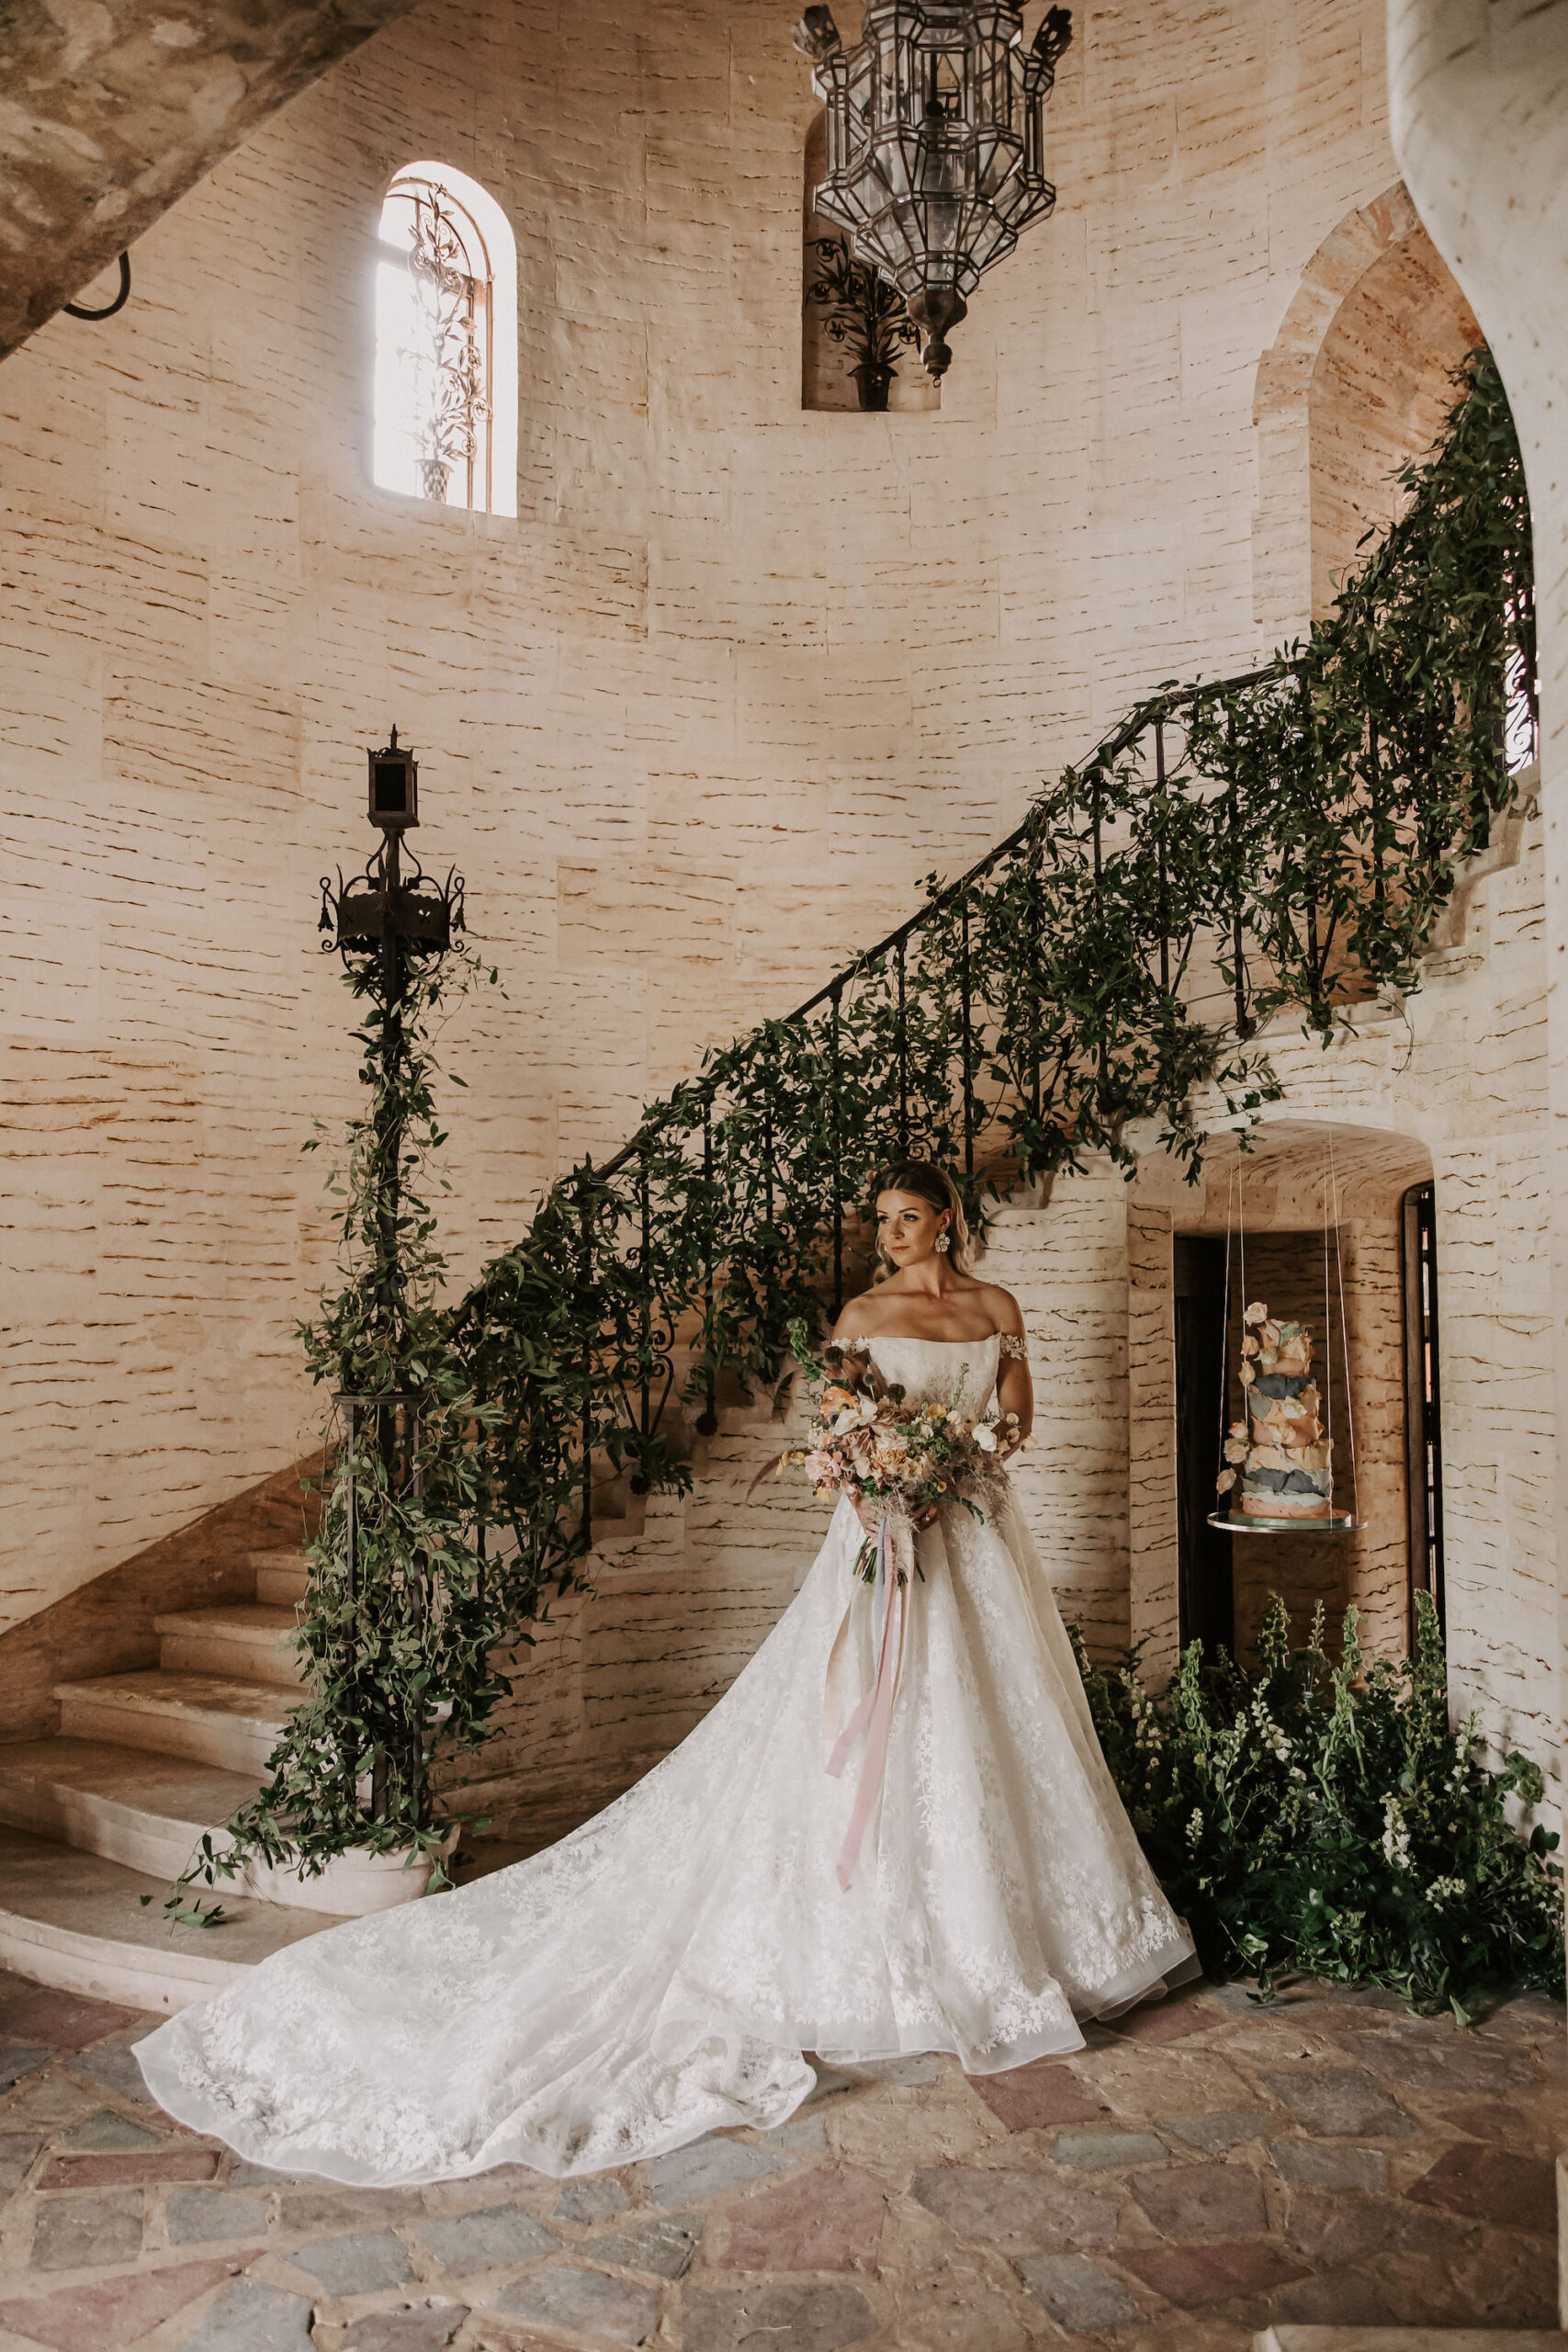 Bridal Portrait in Front of Grand Staircase Adorned with Greenery on Wedding Day